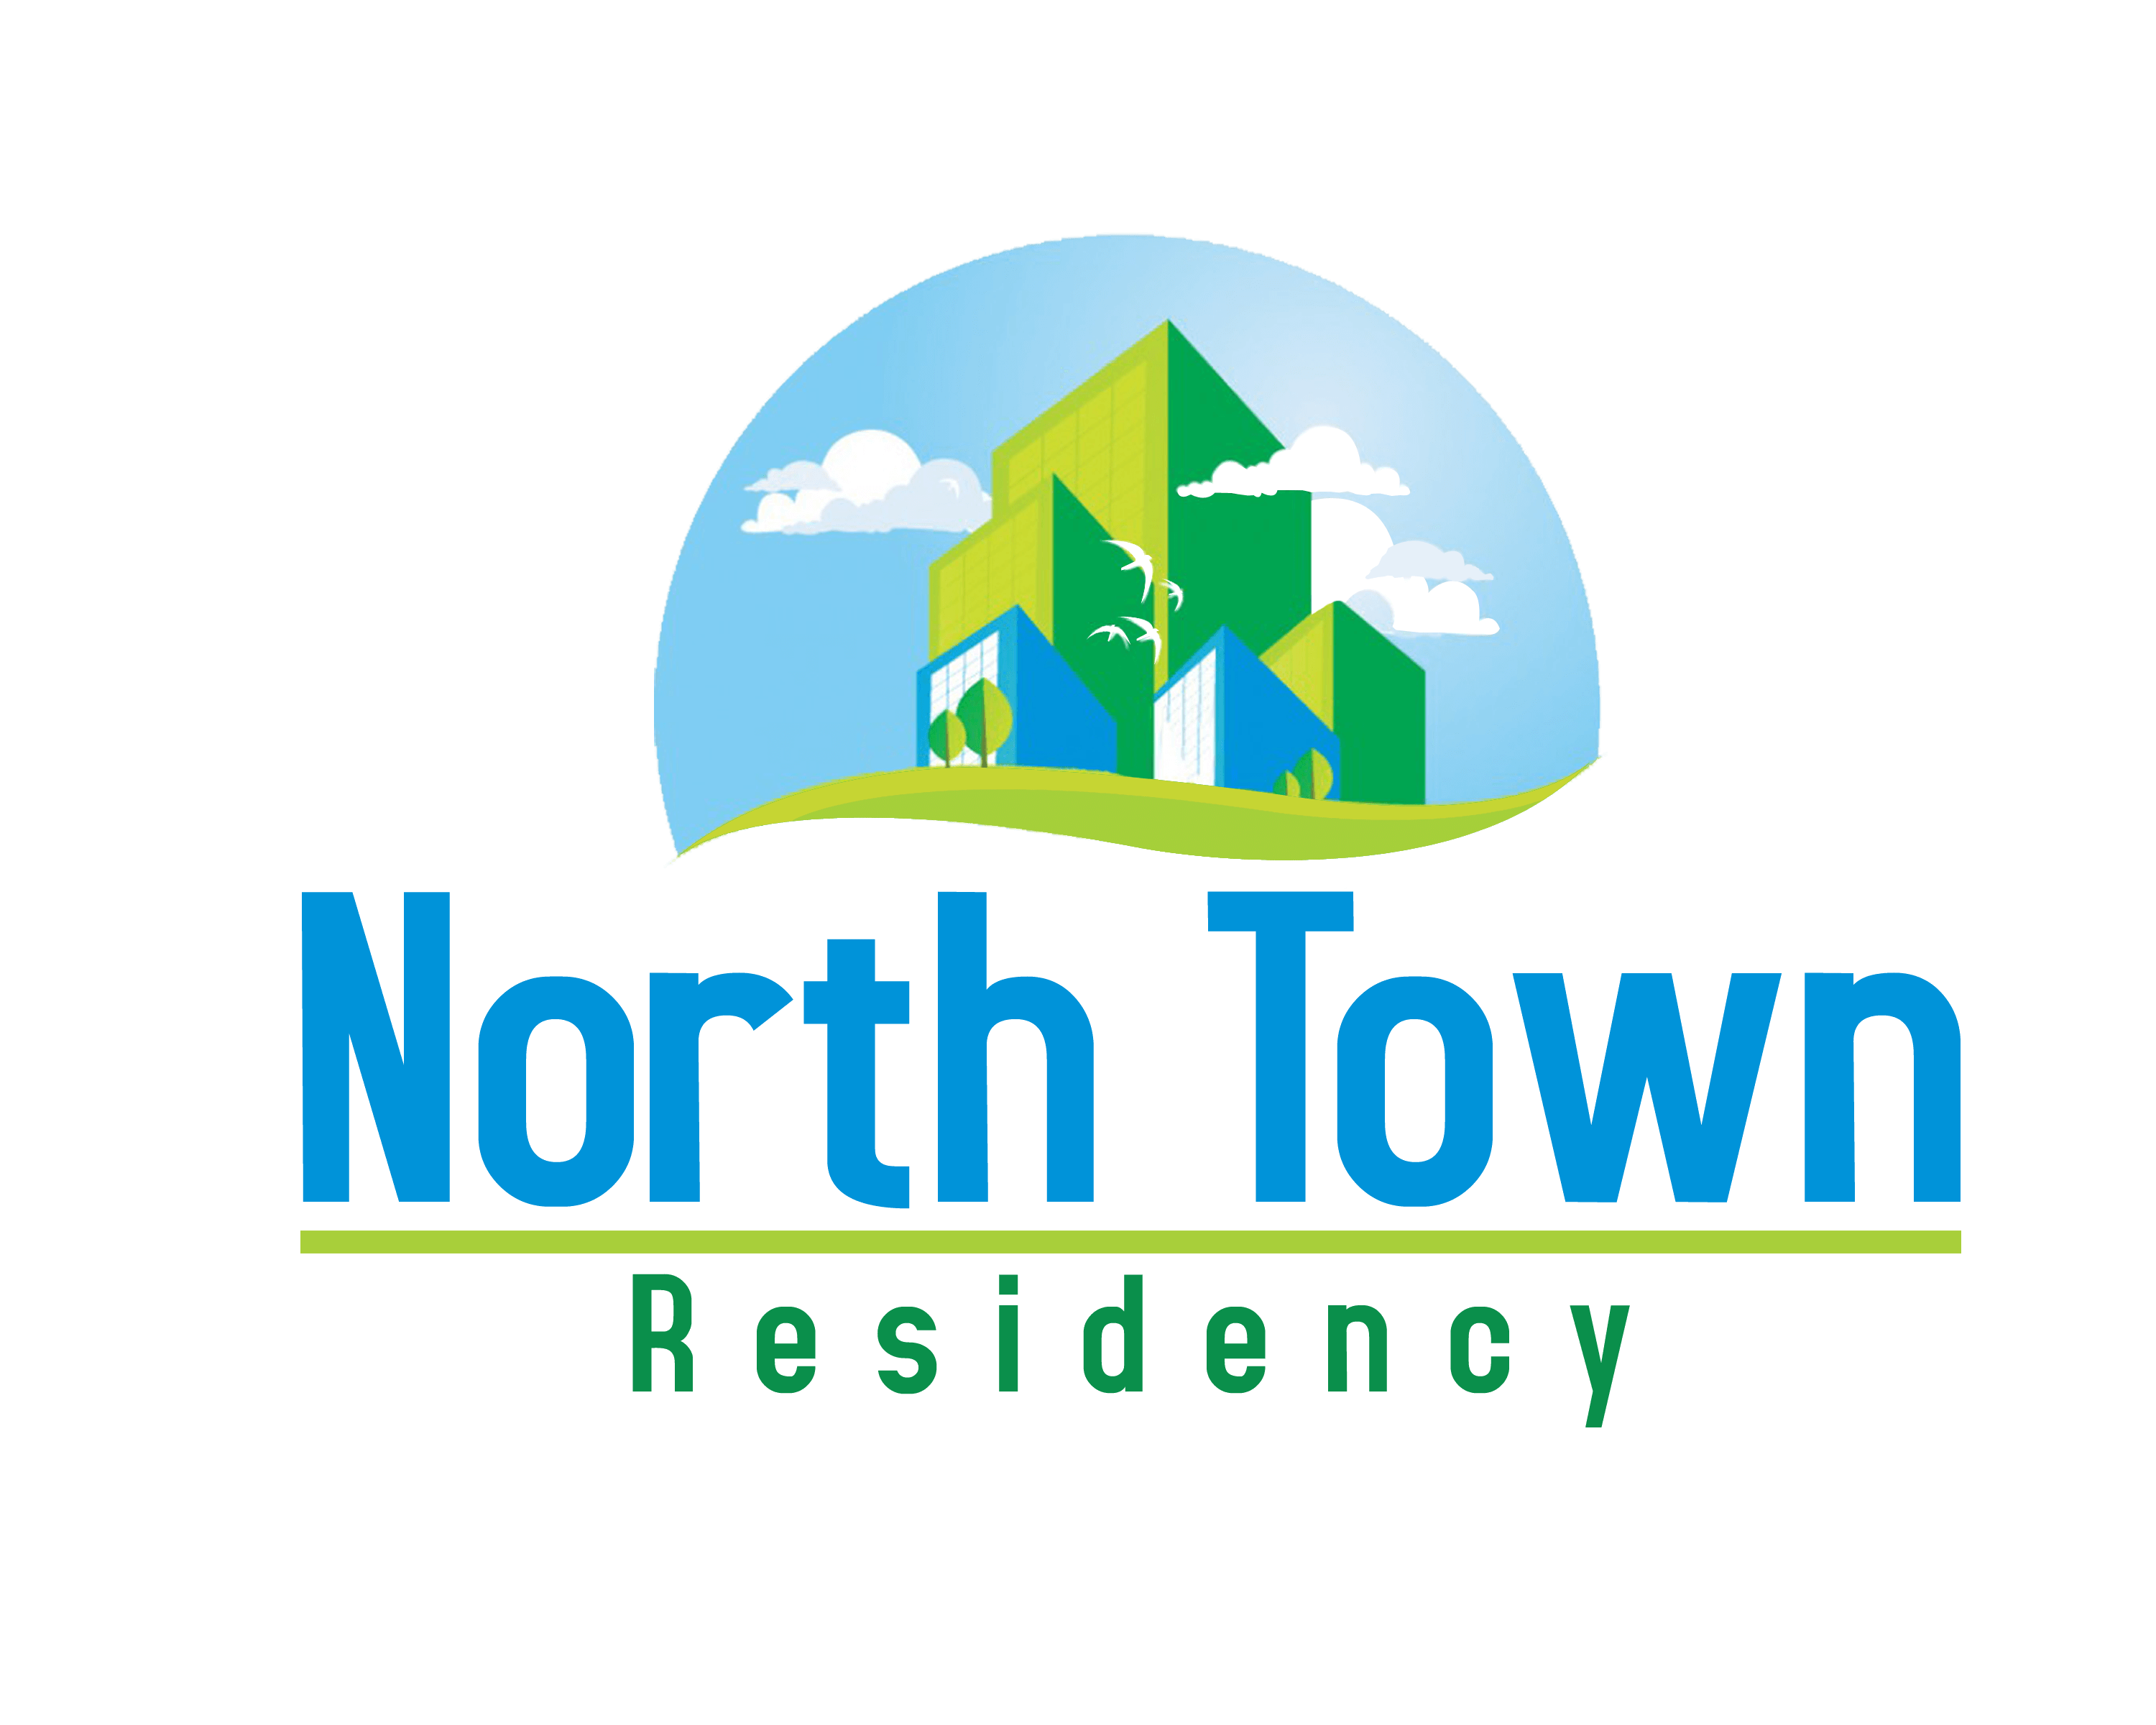 North-town-Residency